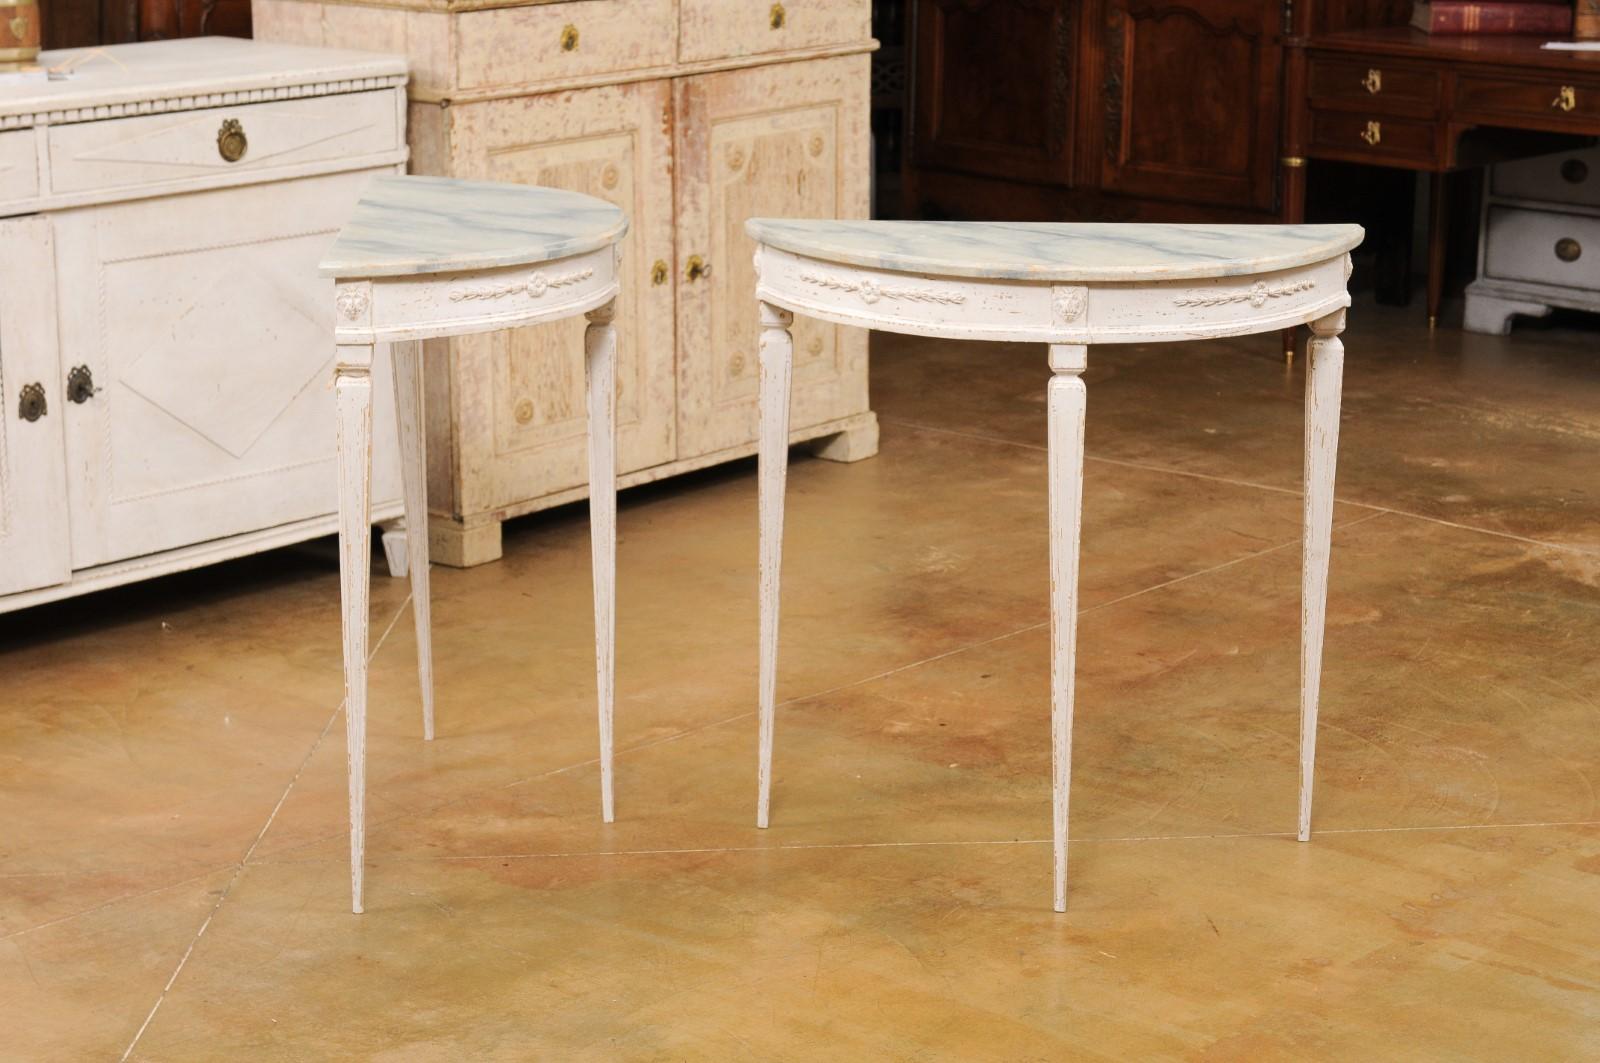 Pair of Swedish 1920s Gustavian Style Painted Demilune Tables with Carved Aprons For Sale 1